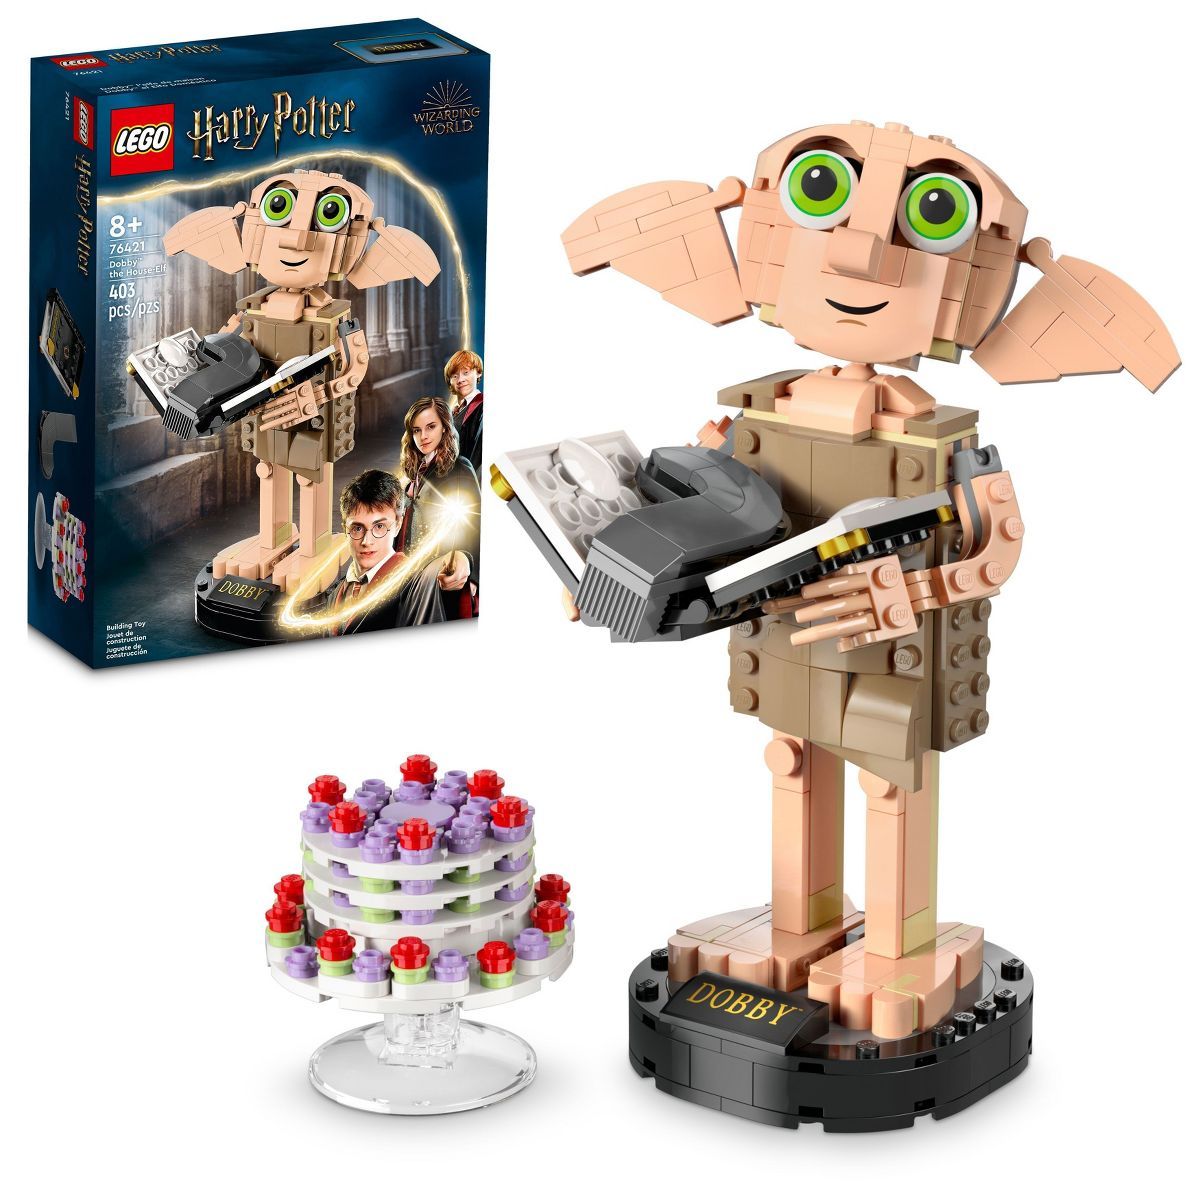 LEGO Harry Potter Dobby the House-Elf Build and Display Set 76421 | Target